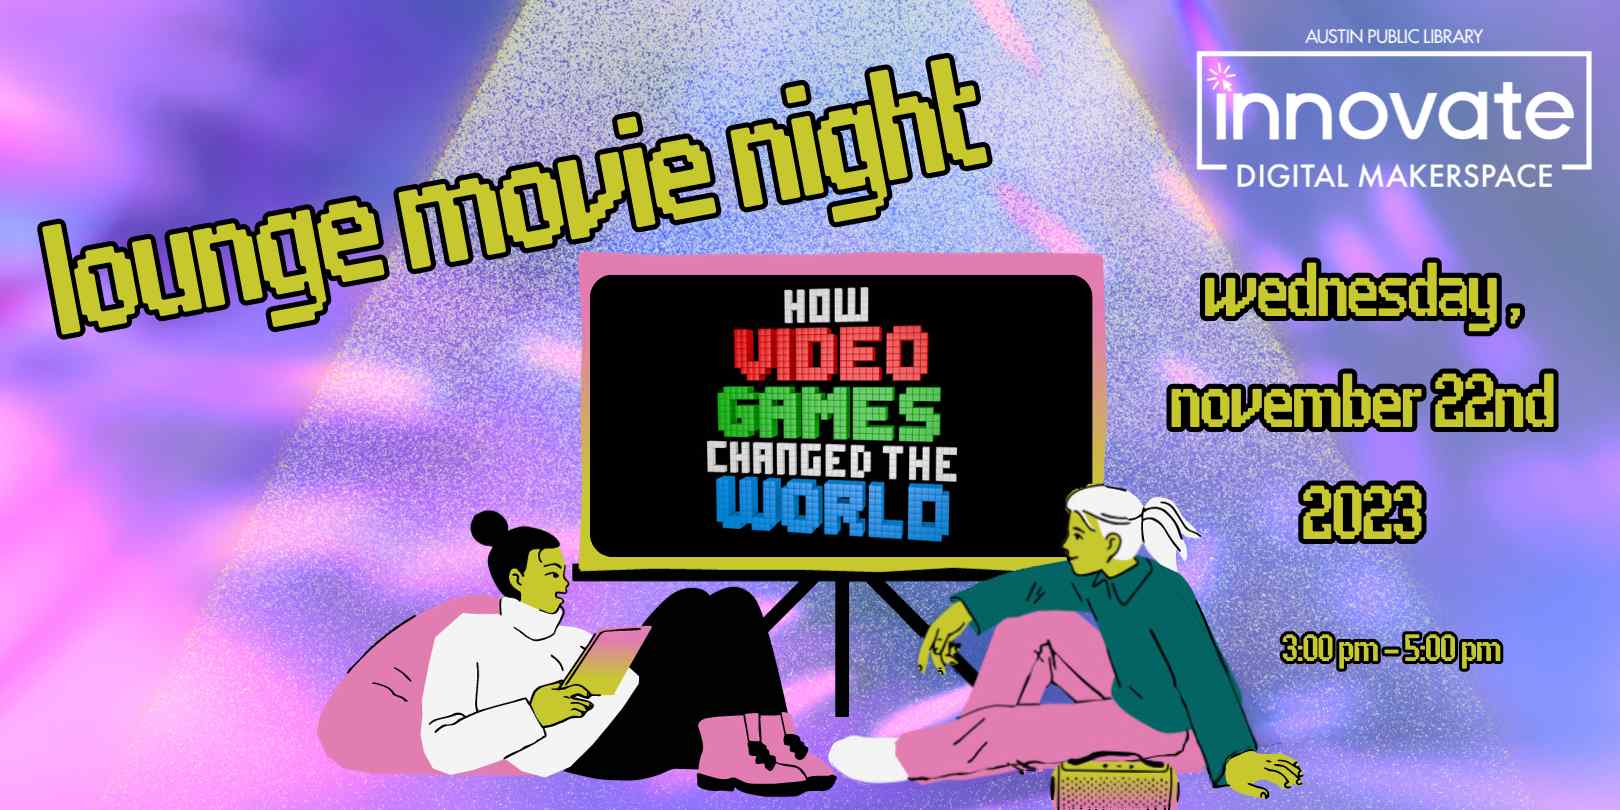 Banner for Lounge Movie Night